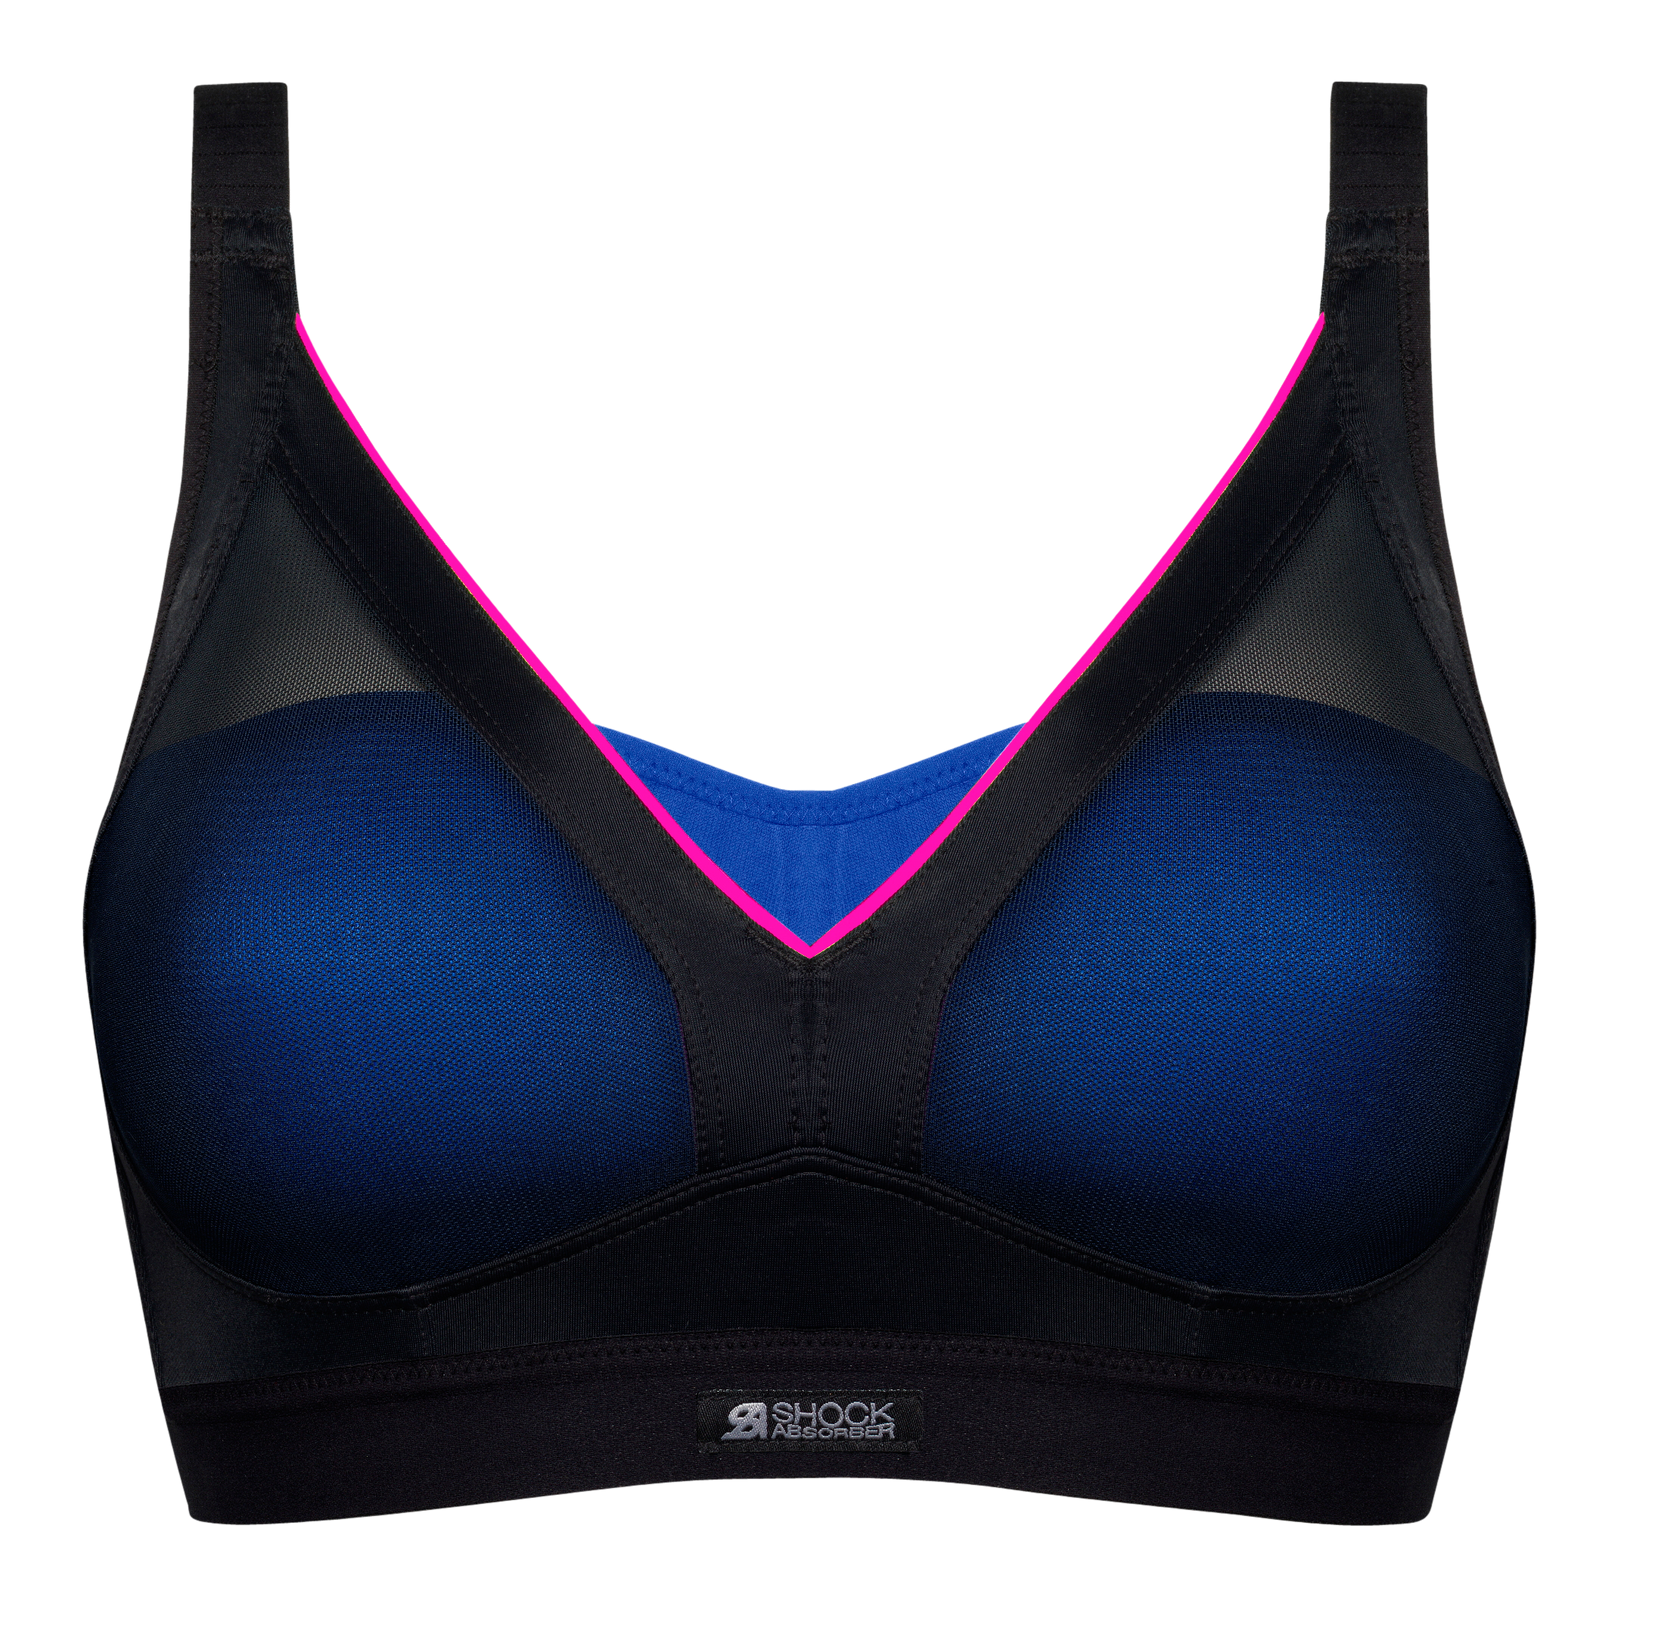 Active Shaped Support sports bra, Shock Absorber